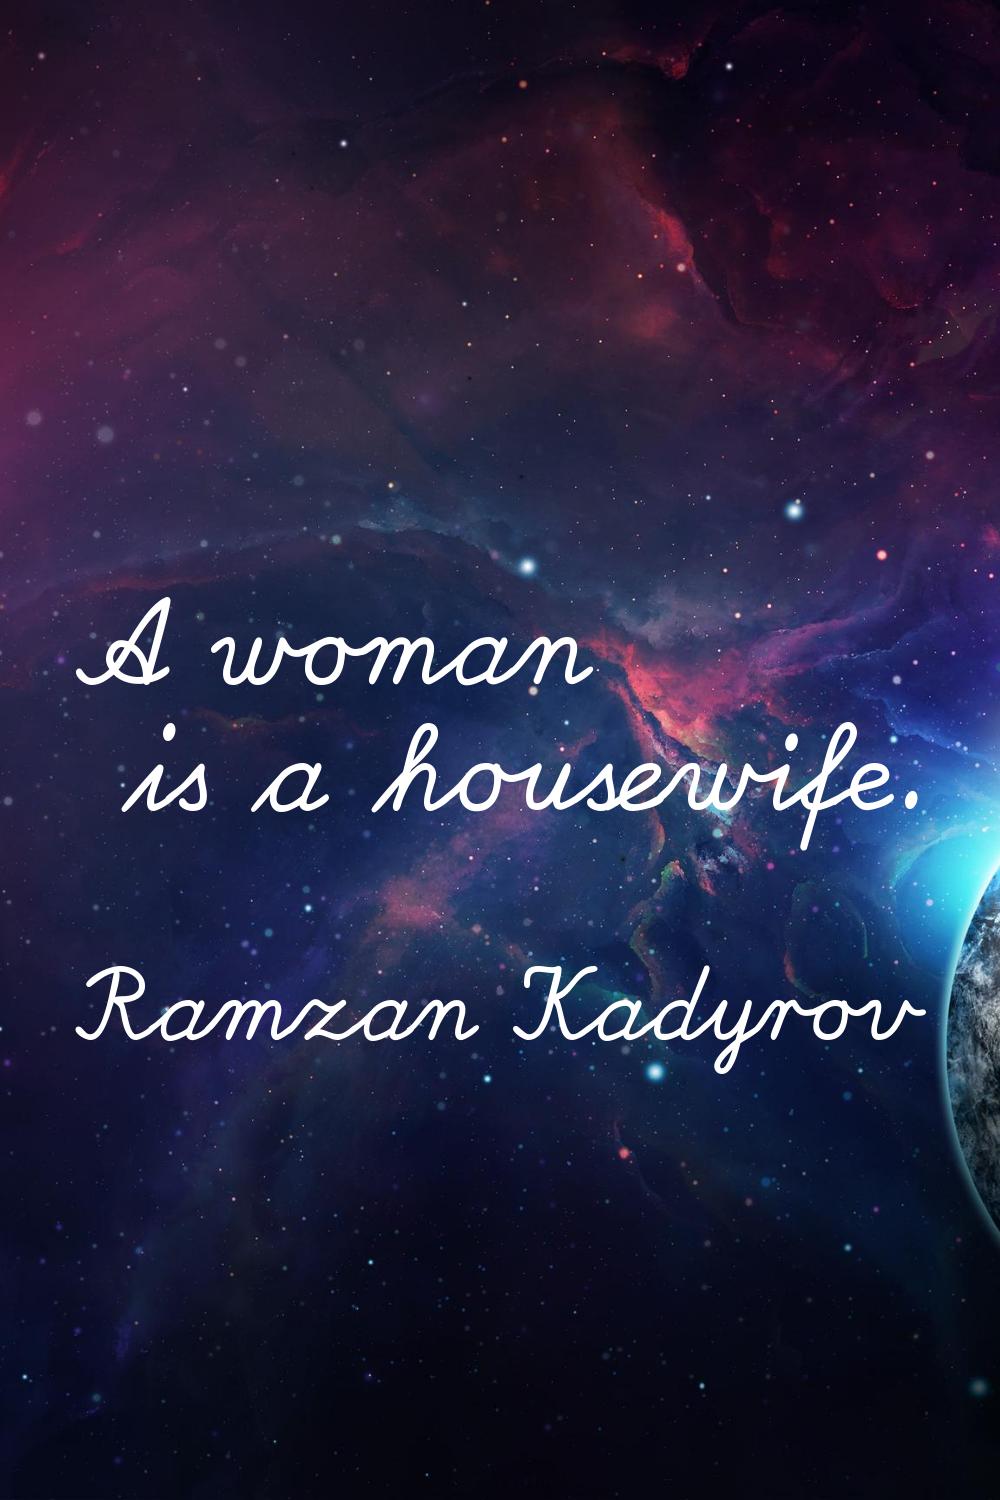 A woman is a housewife.